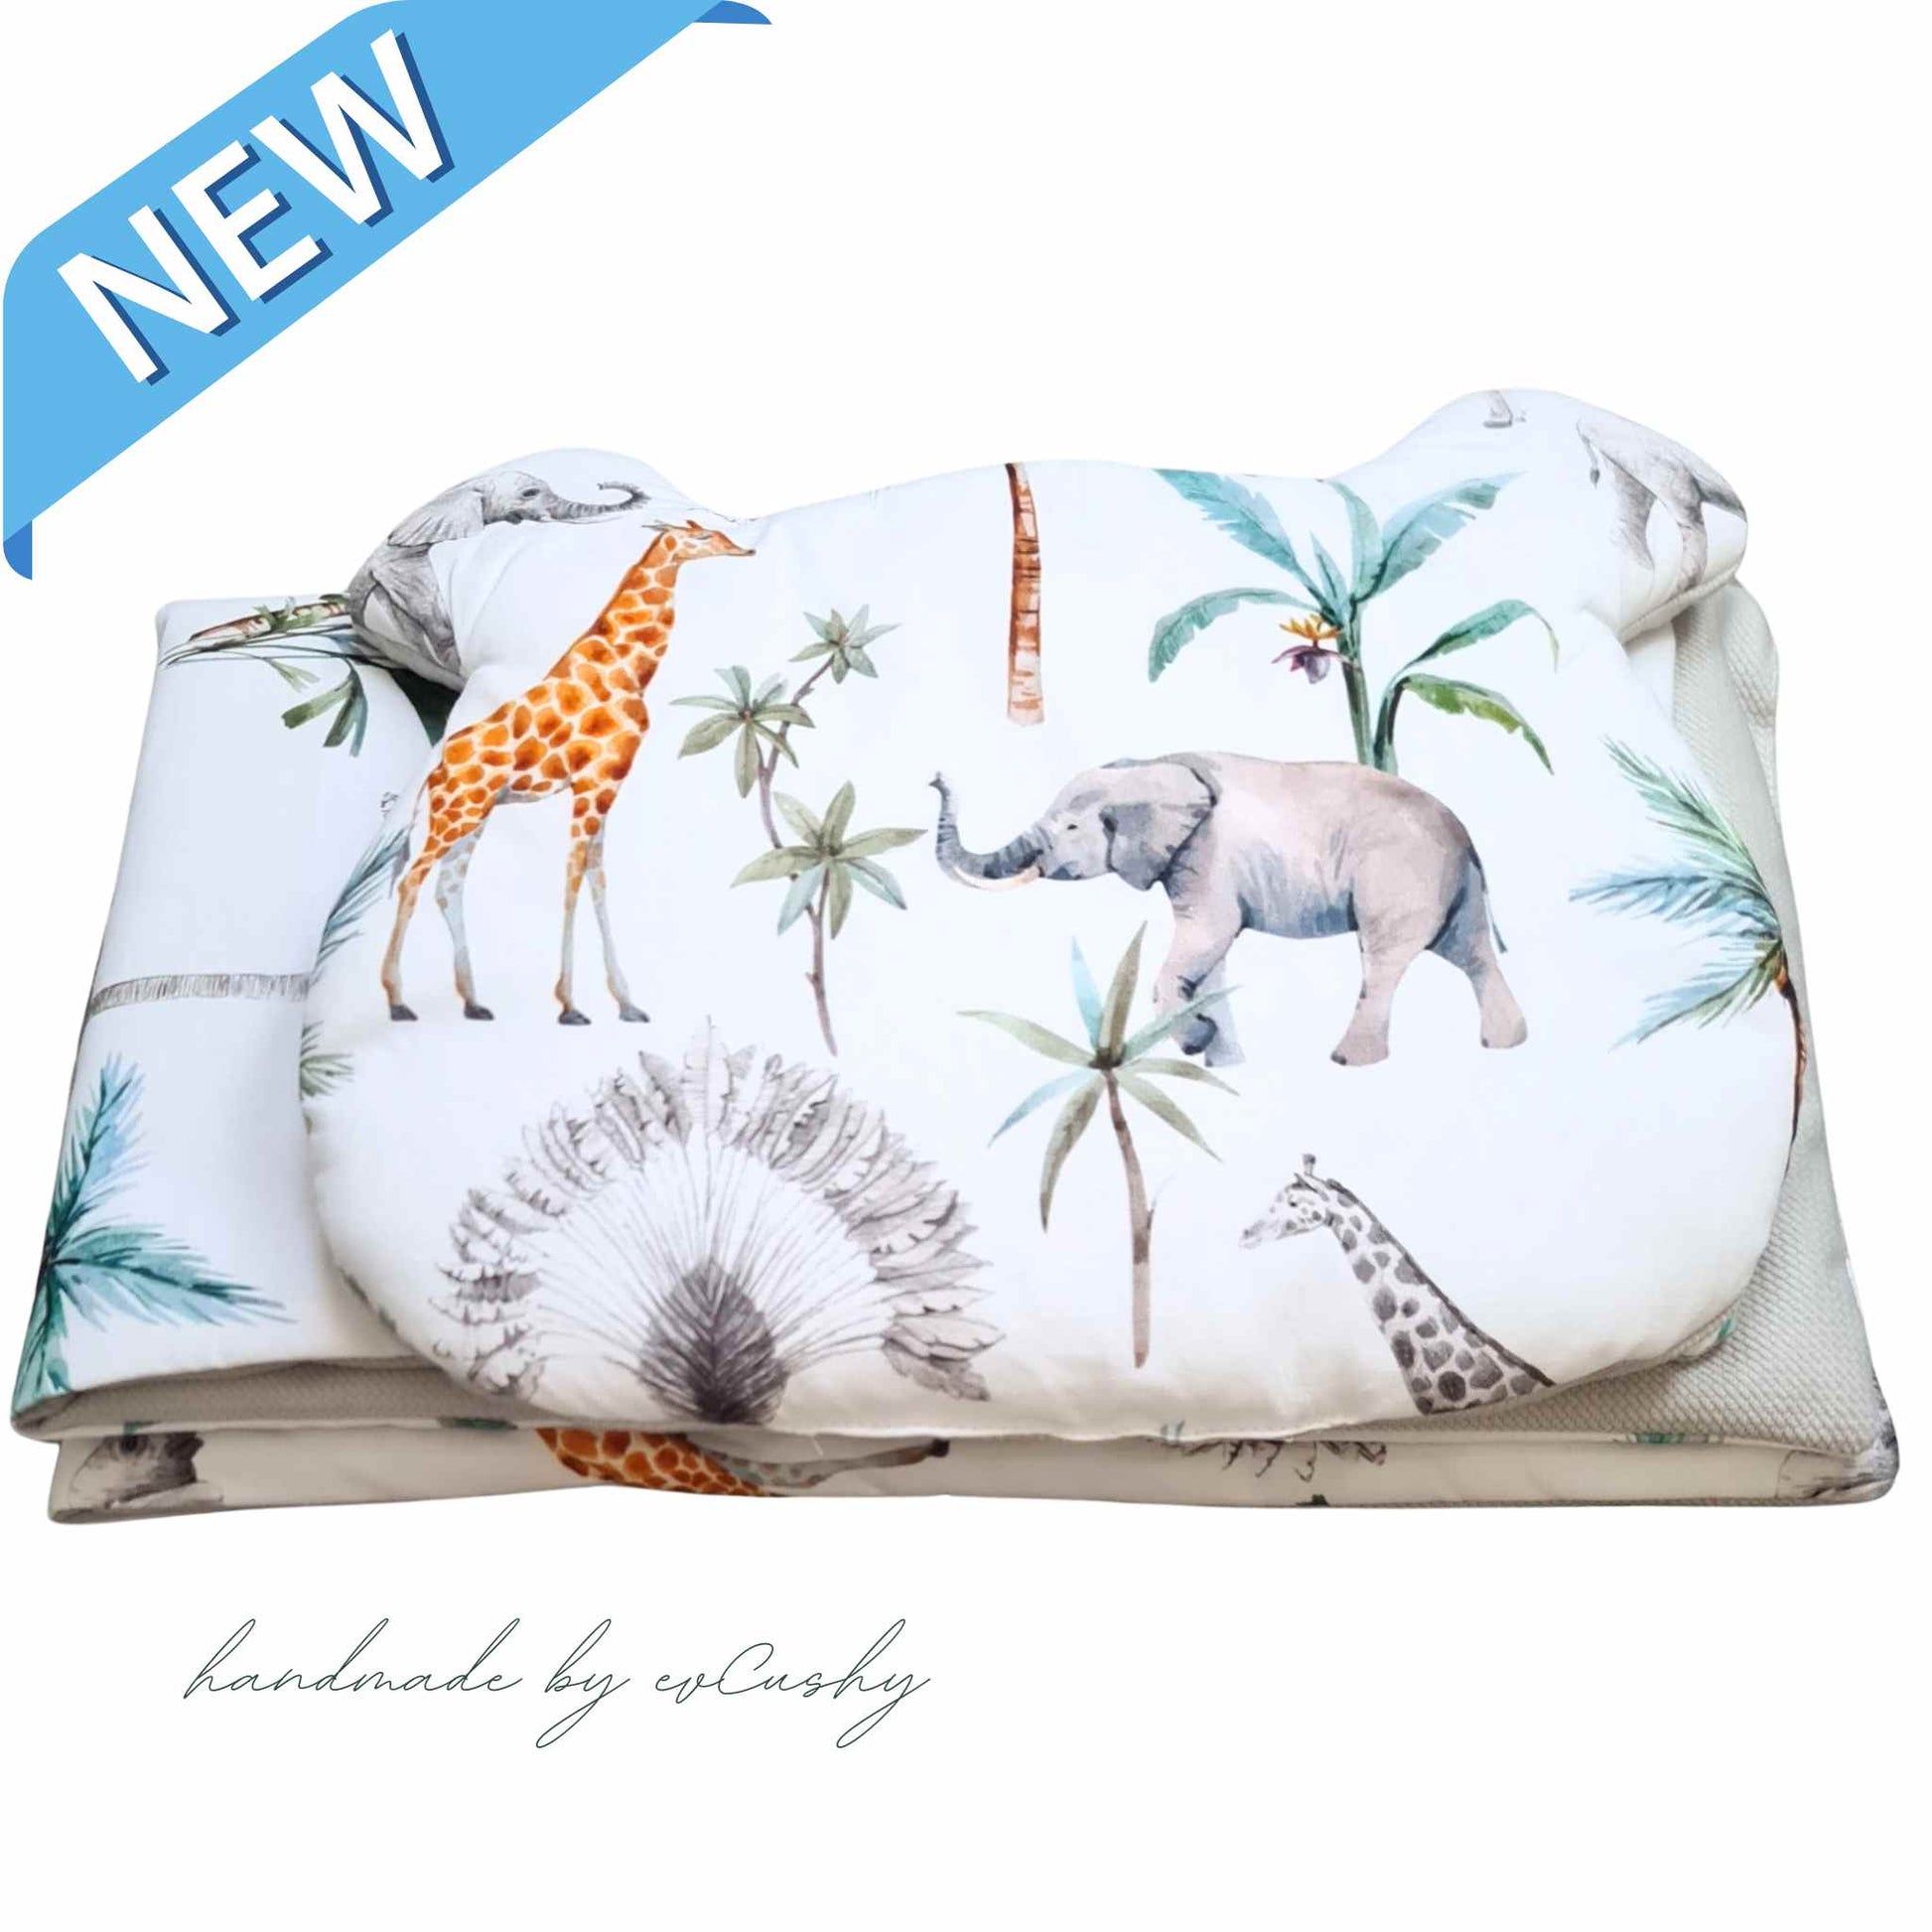 baby bedding set quilt and pillow for crib moses basket carry cot grey velvet and safari pattern cotton evcushy 